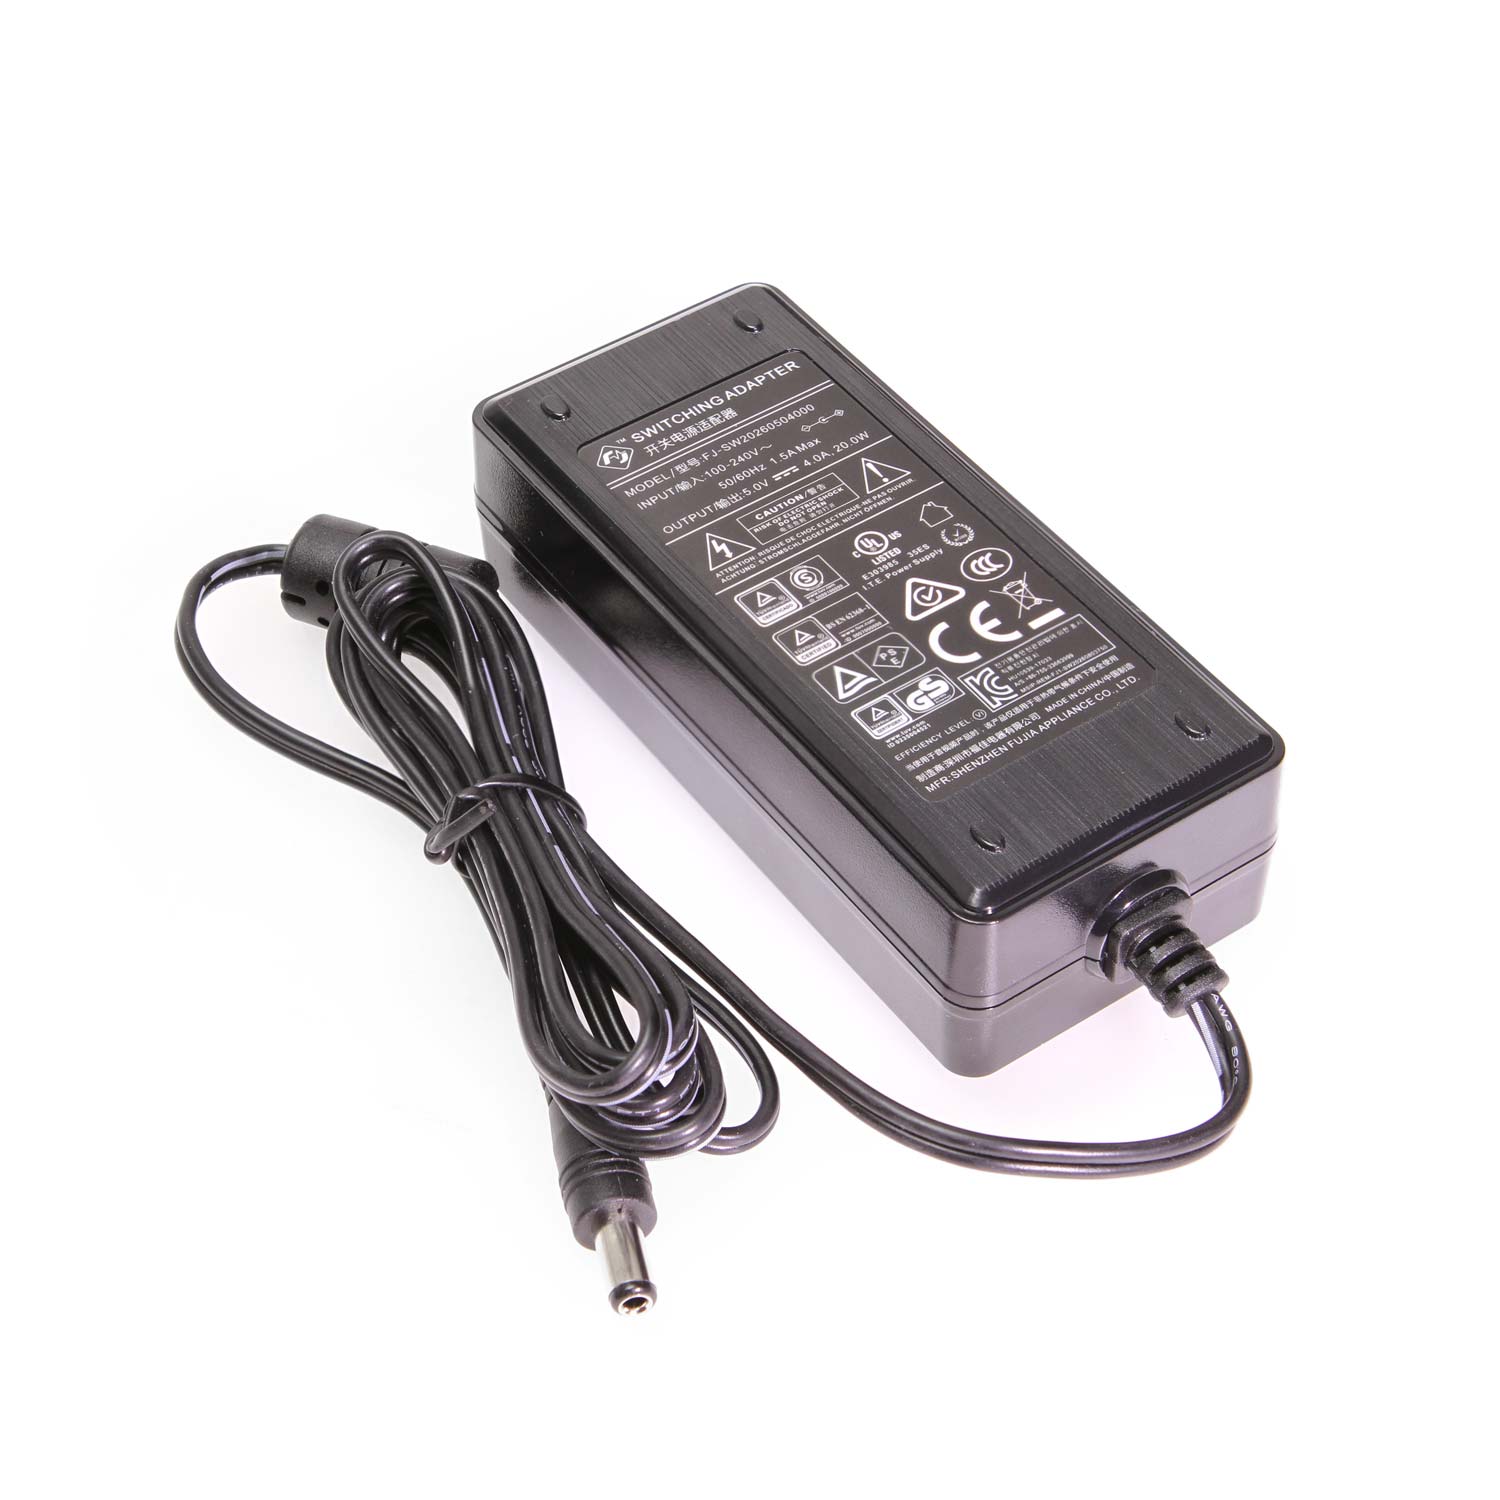 5 Volt – 4 Amp DC Barrel Switching Power Supply - Coolgear